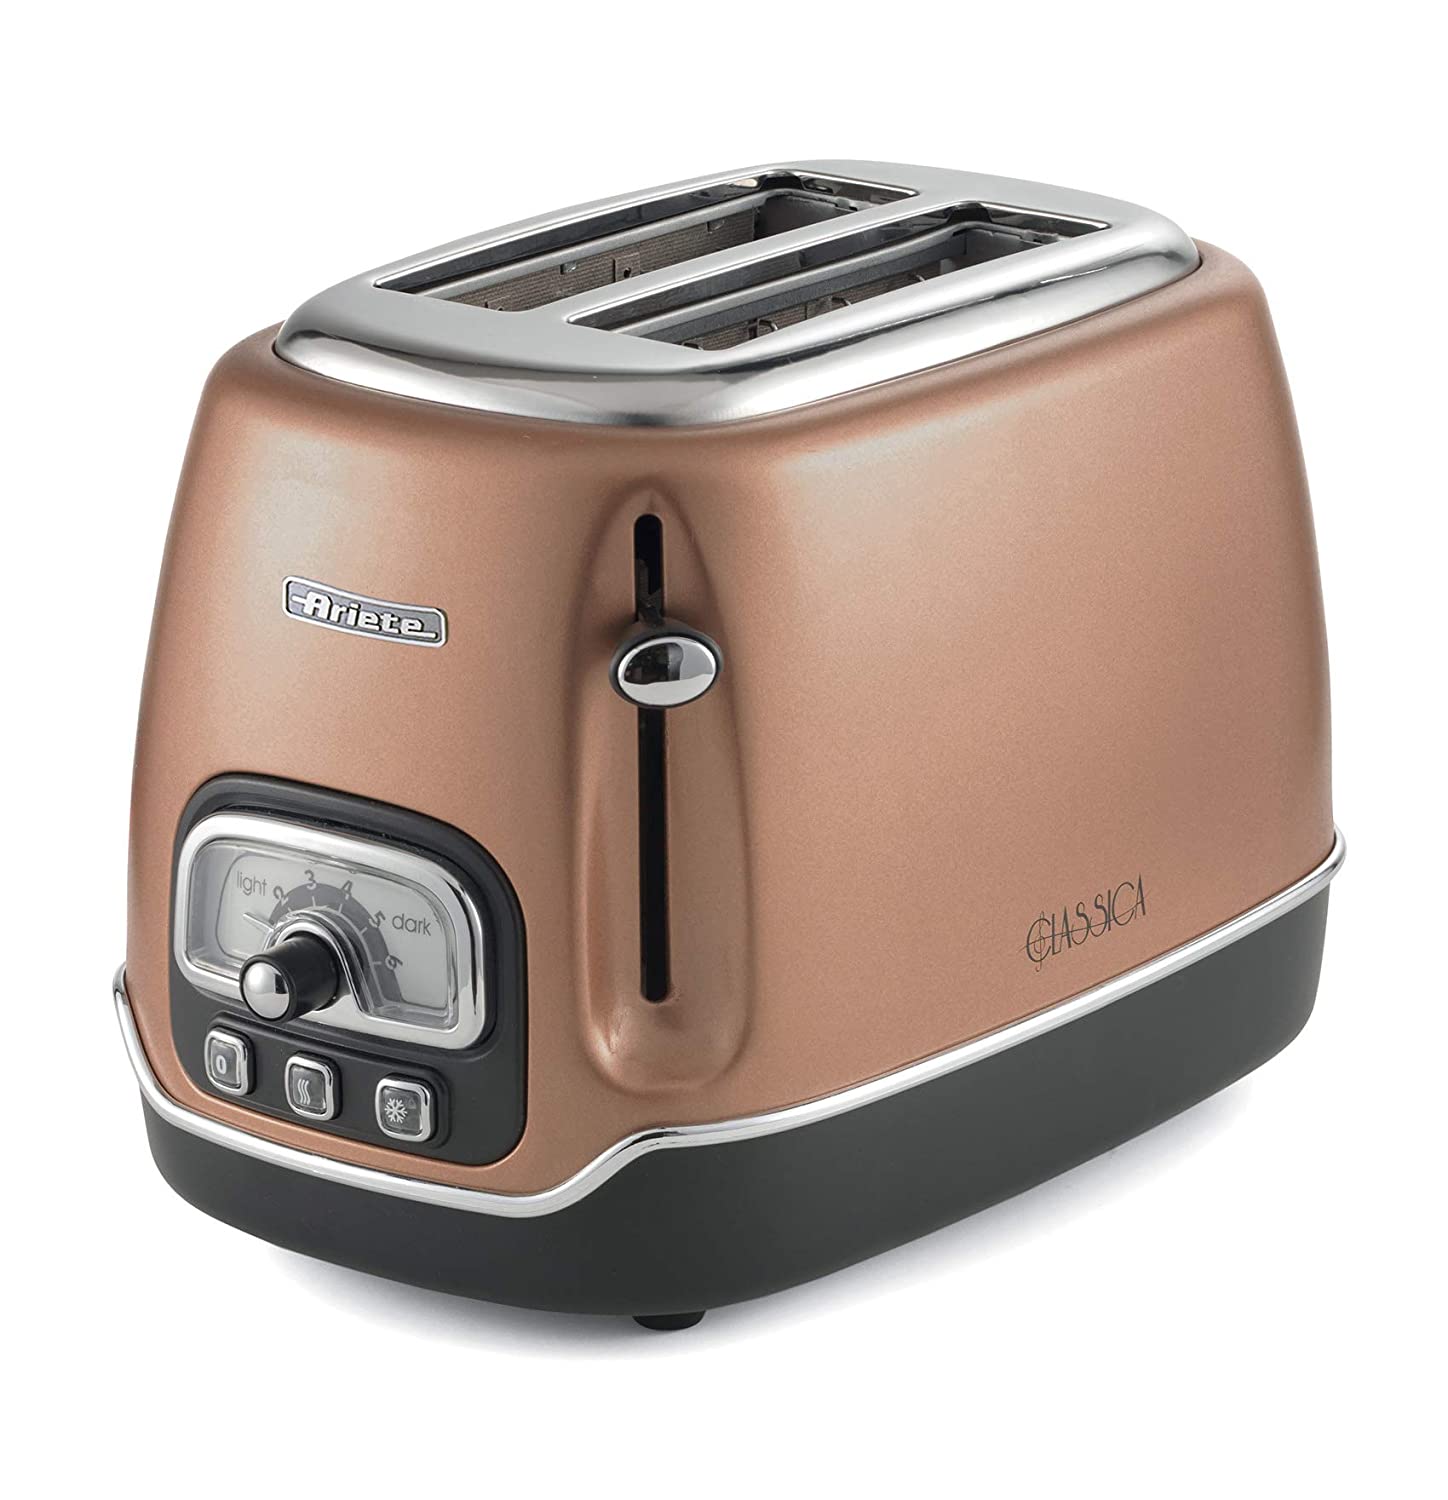 Ariete Tostapane Classica 158/38, Electric Toaster 2 Slices, Without Tongs,  815 W, 3 Functions, 6 Browning Levels, Copper